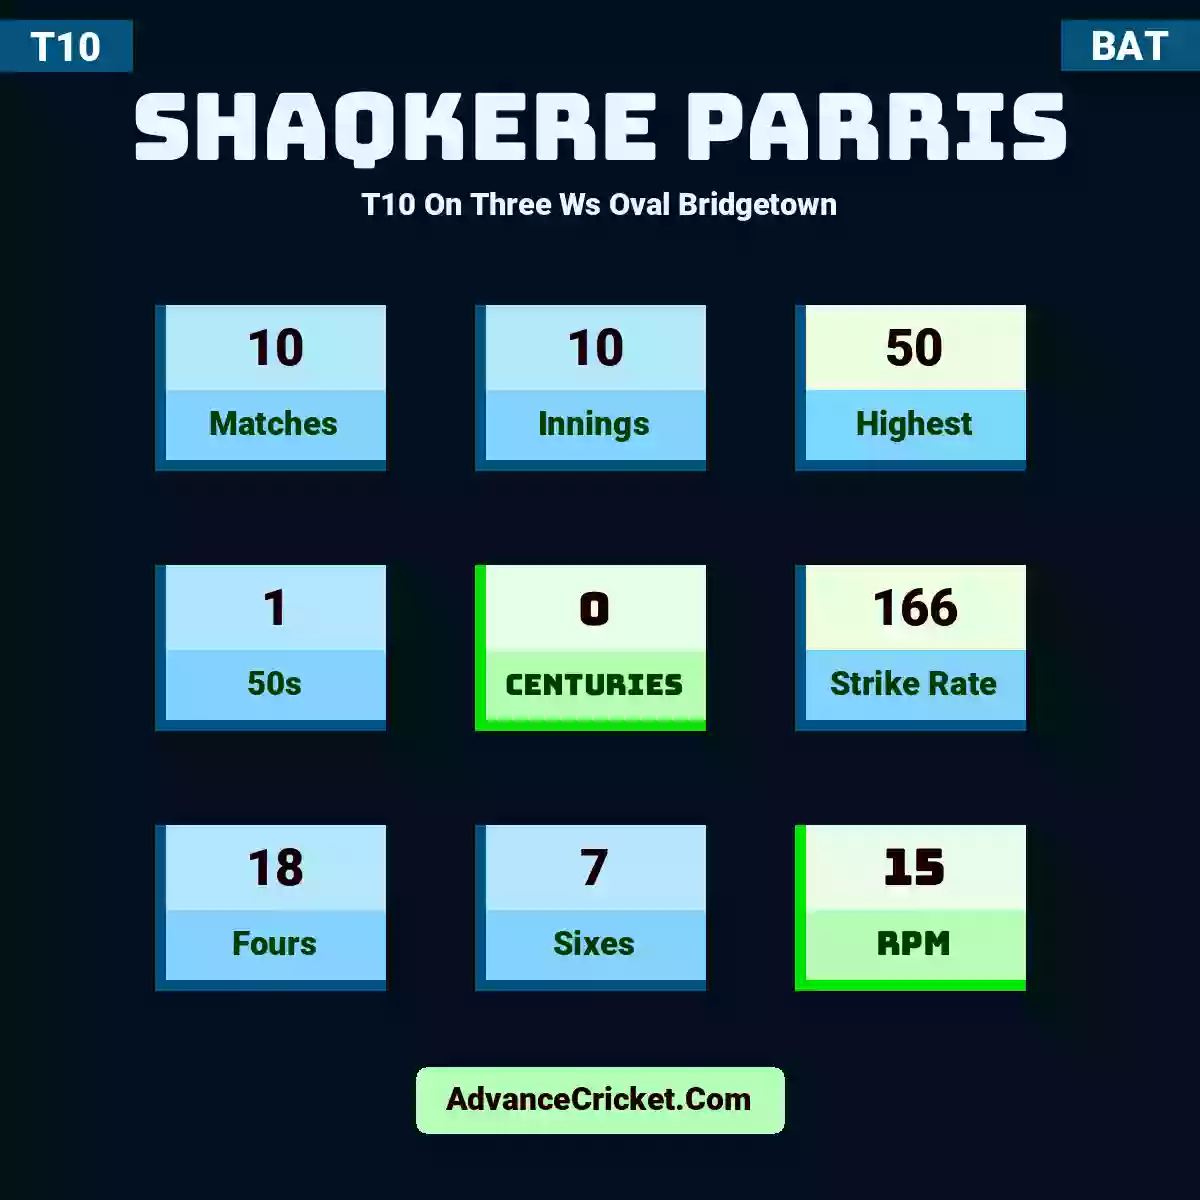 Shaqkere Parris T10  On Three Ws Oval Bridgetown, Shaqkere Parris played 10 matches, scored 50 runs as highest, 1 half-centuries, and 0 centuries, with a strike rate of 166. S.Parris hit 18 fours and 7 sixes, with an RPM of 15.